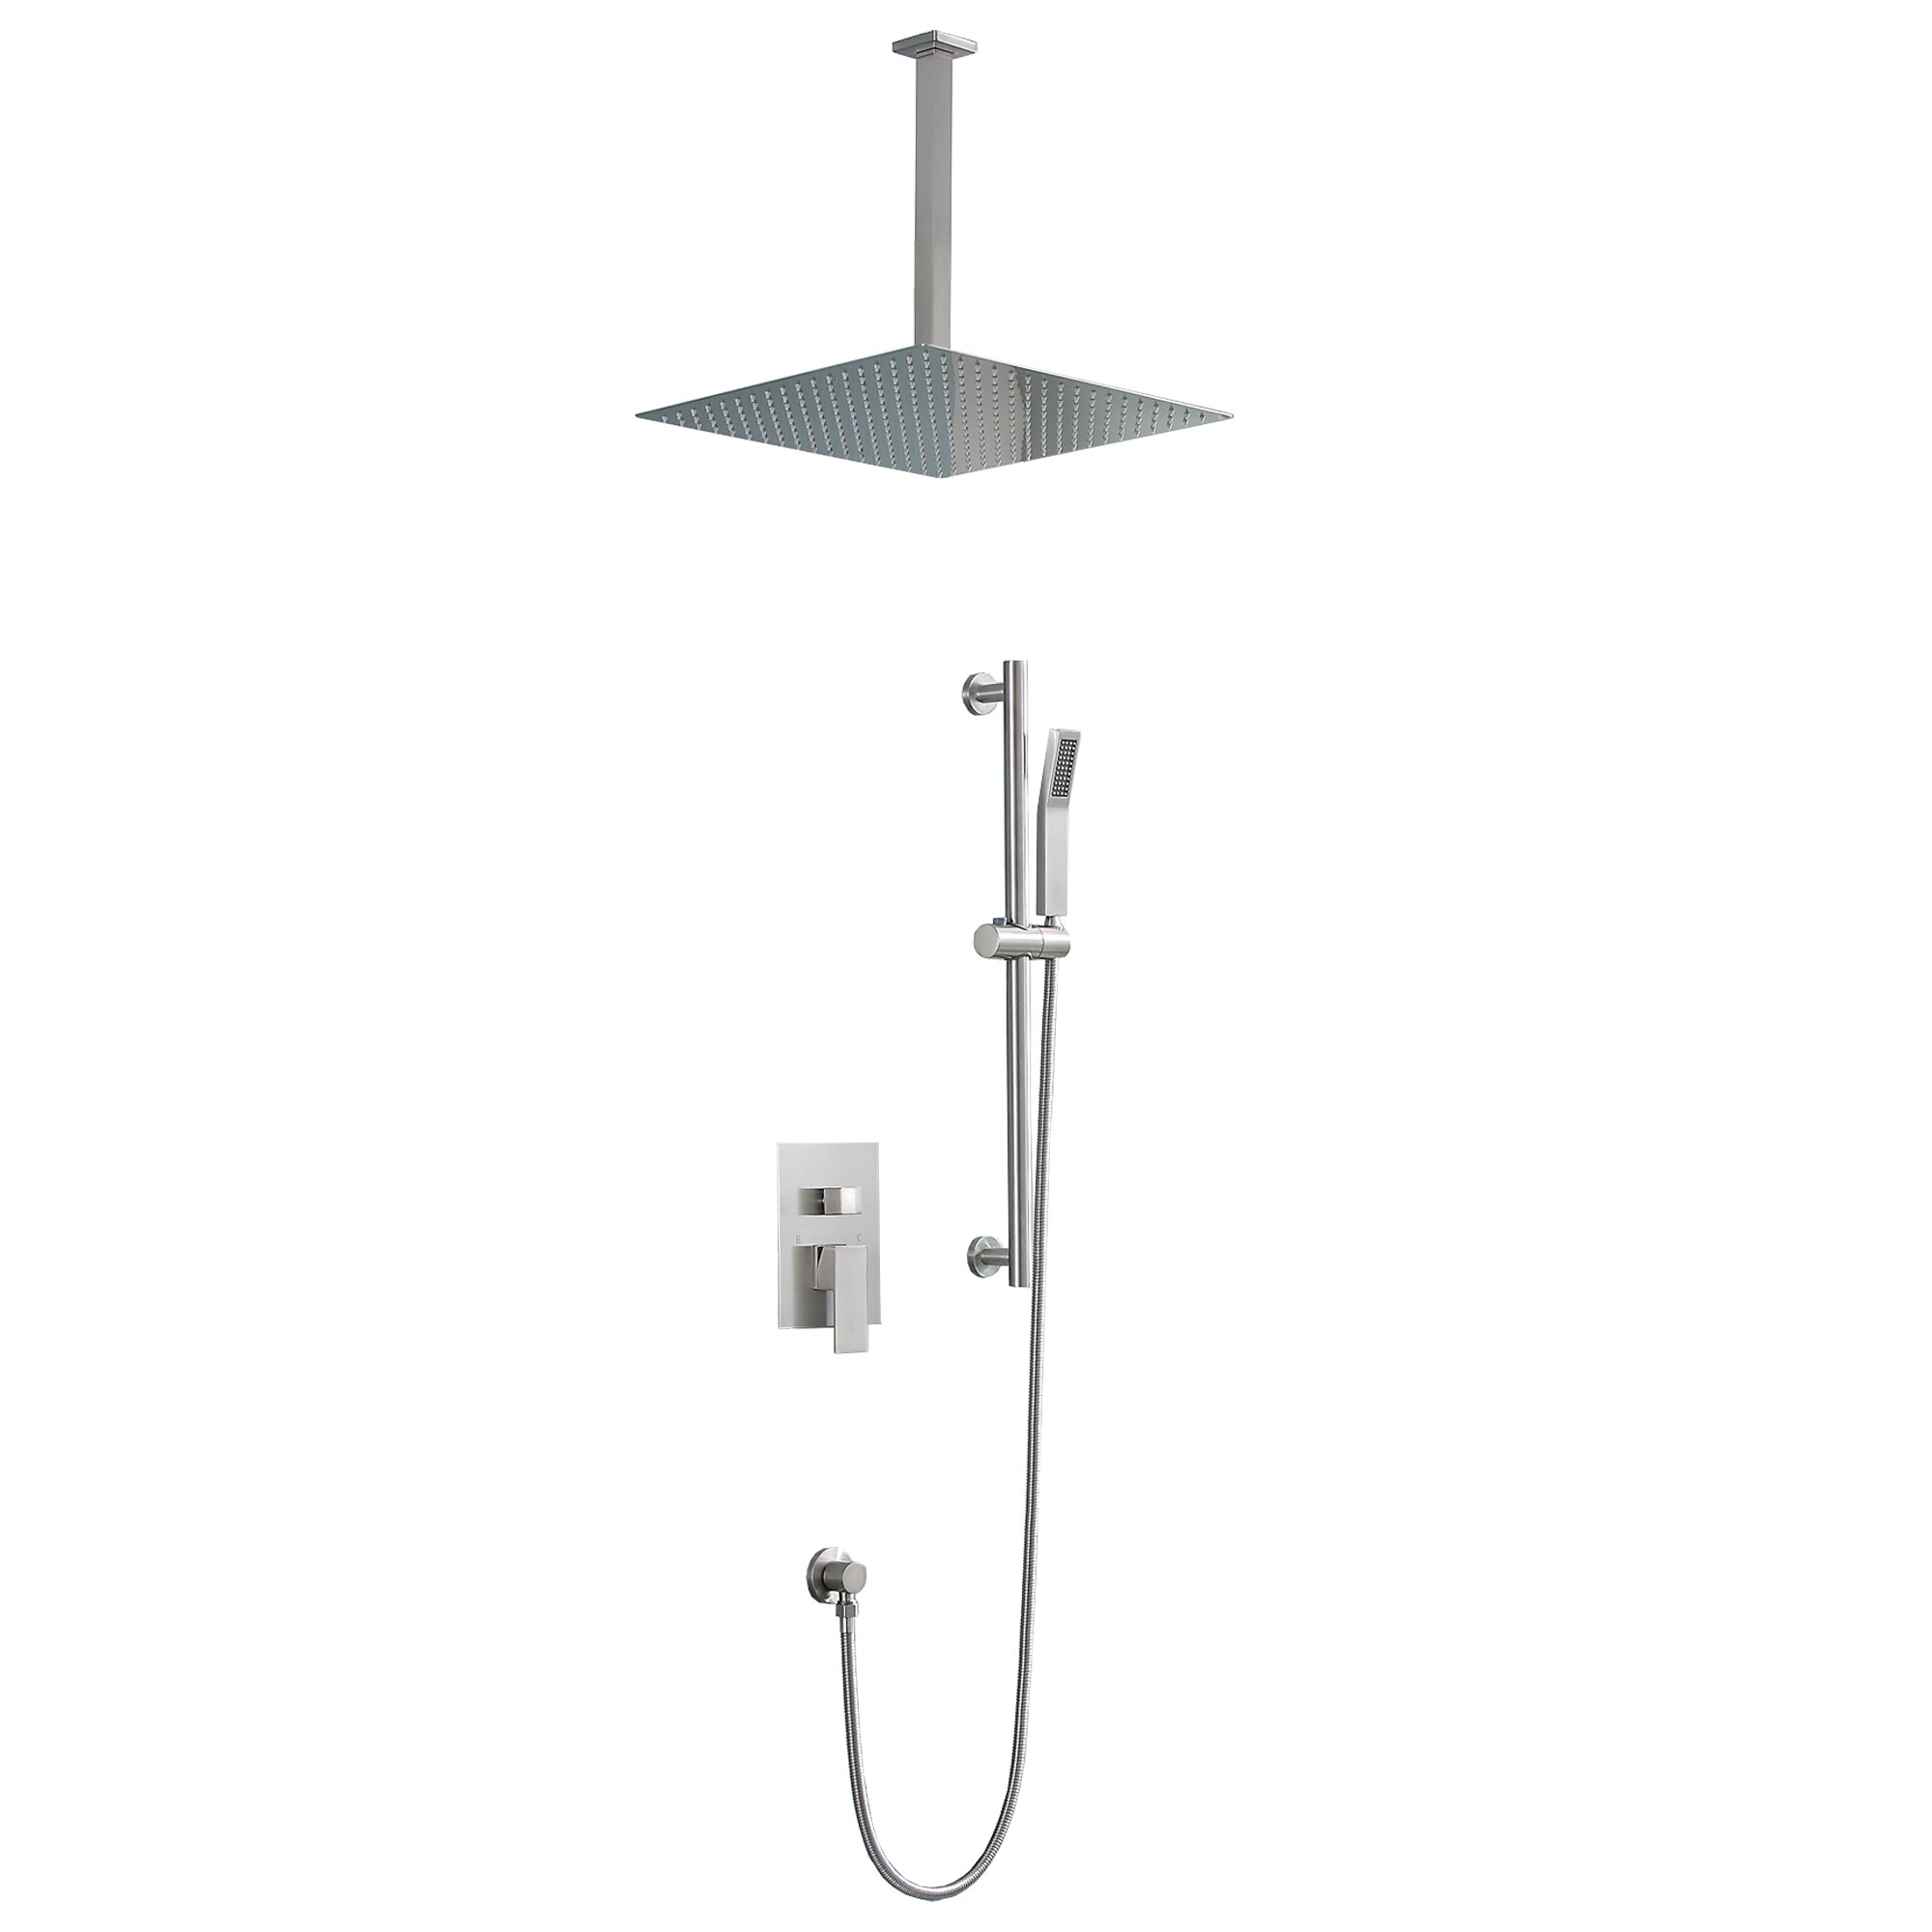 Clihome Ceiling Mount Shower System